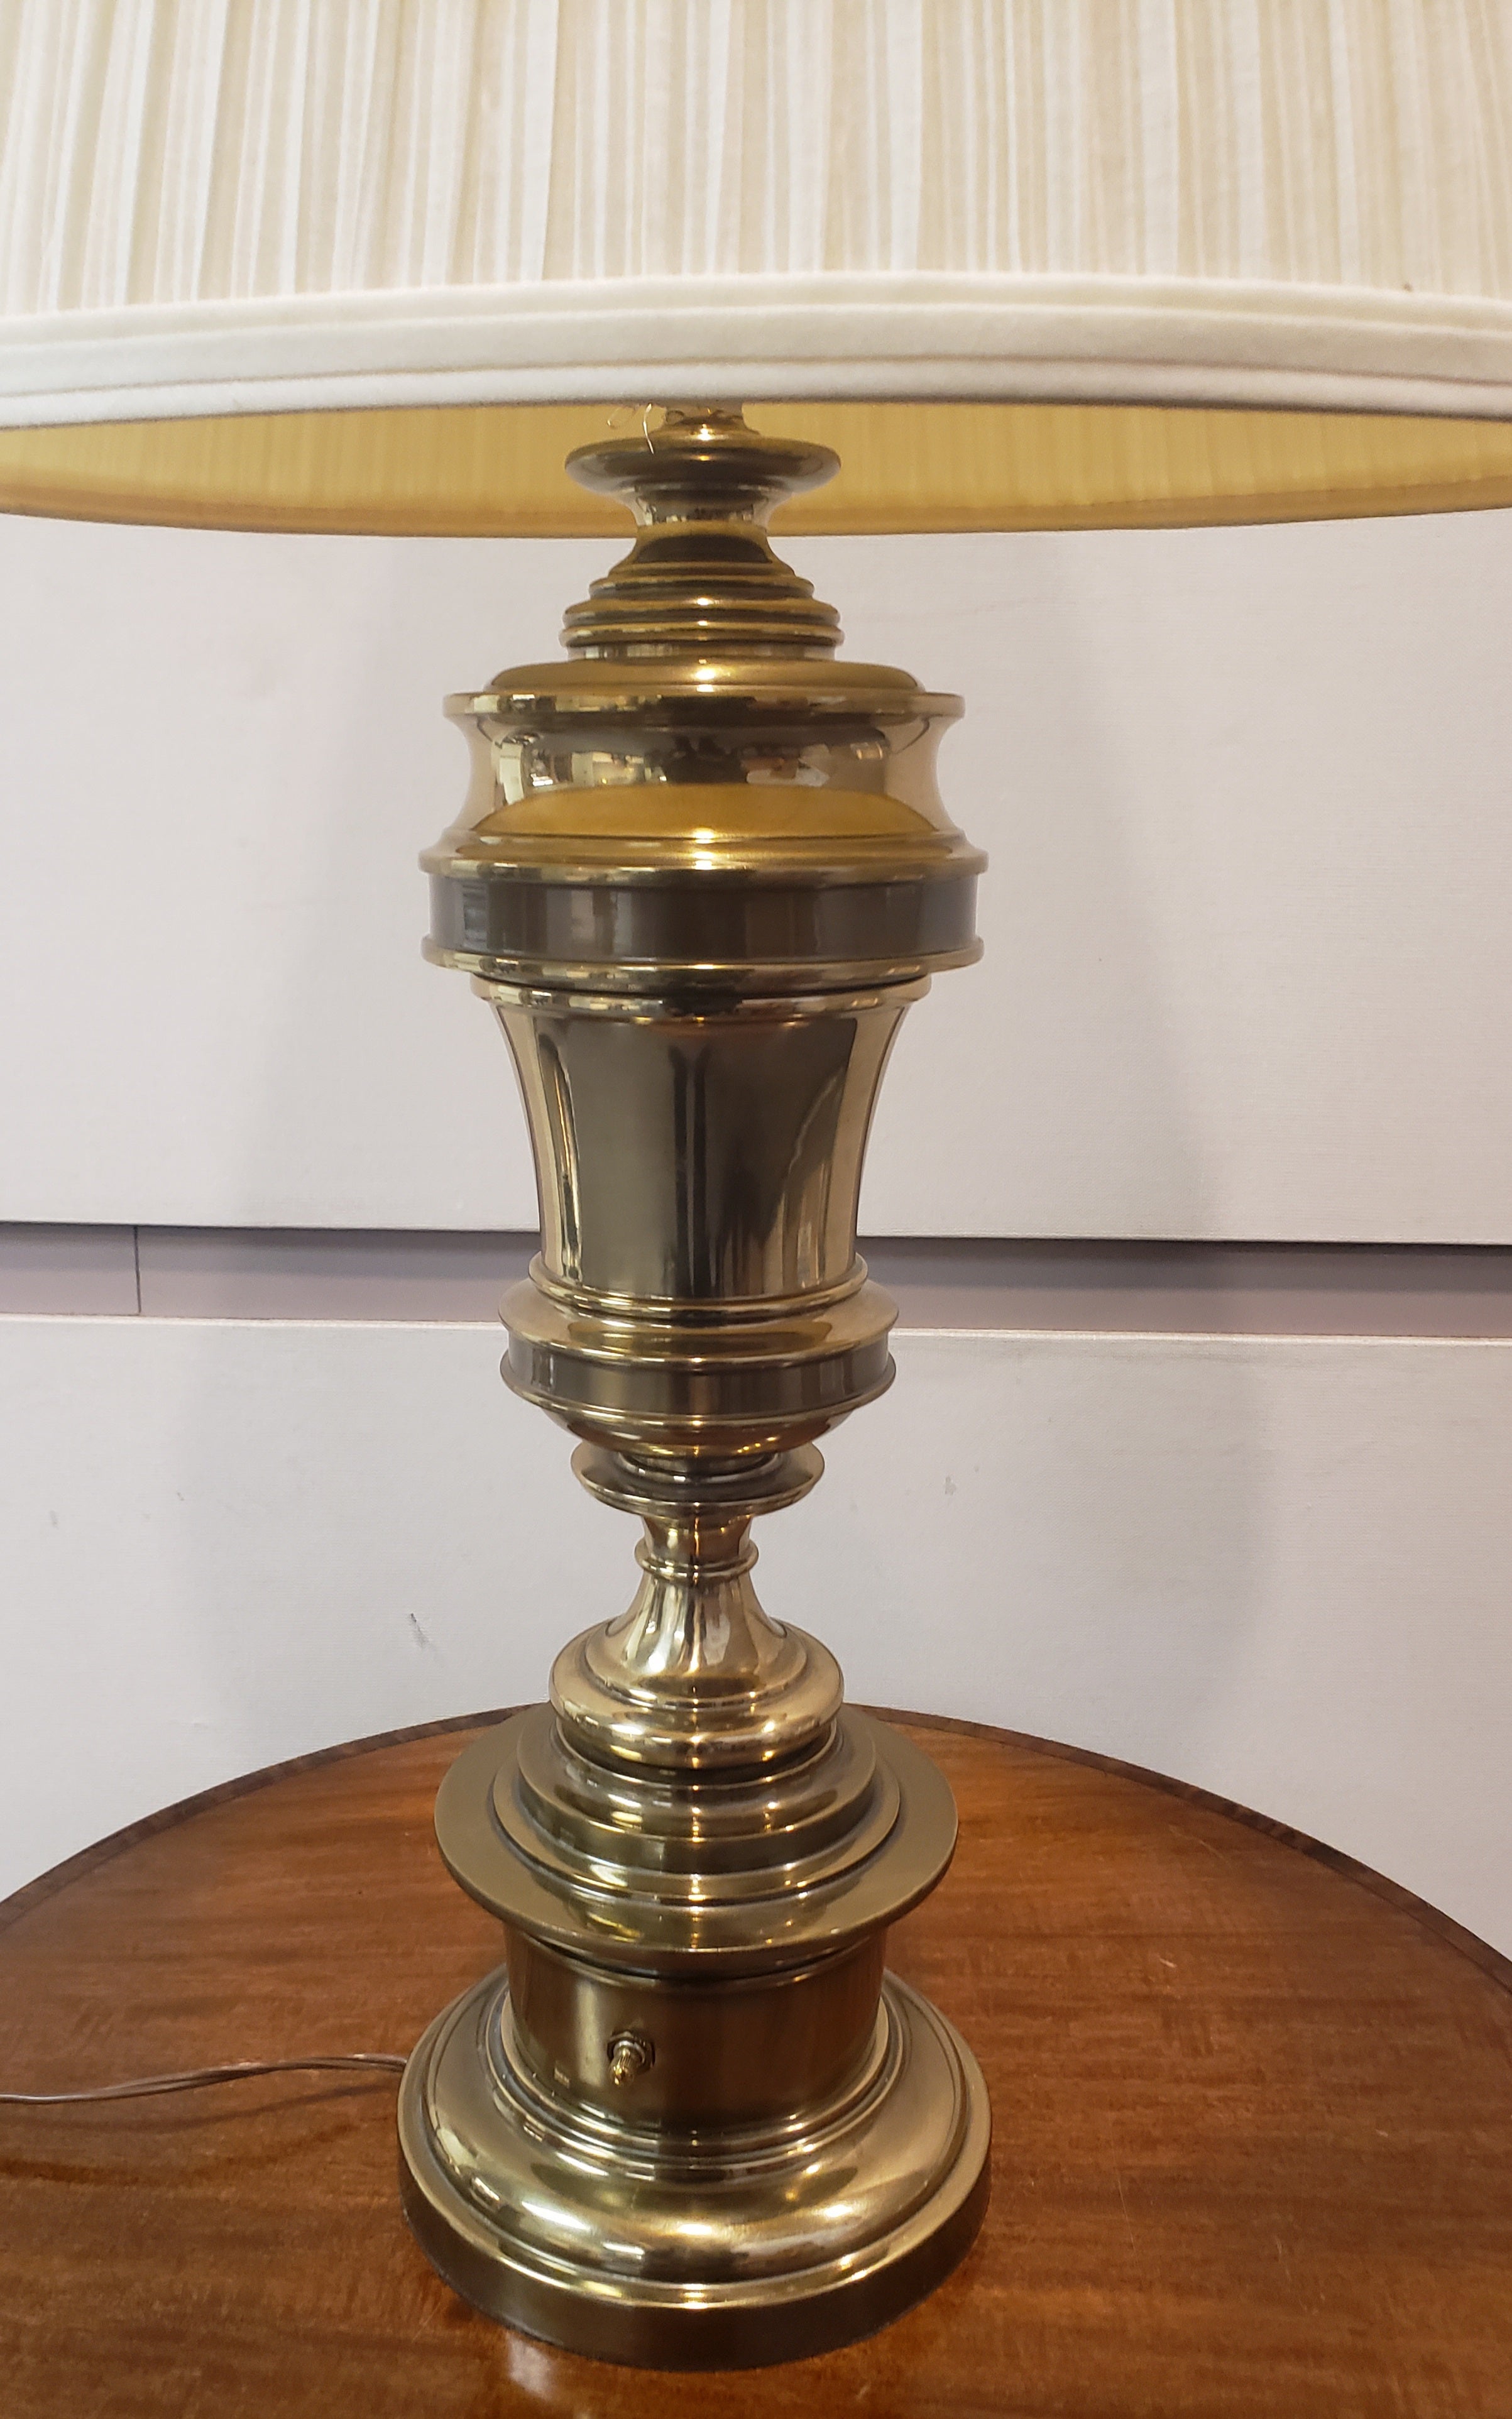 Late 20th Century Stiffel Art Nouveau Style large brass table lamp
Measures 7 inches in diameter and stands 34